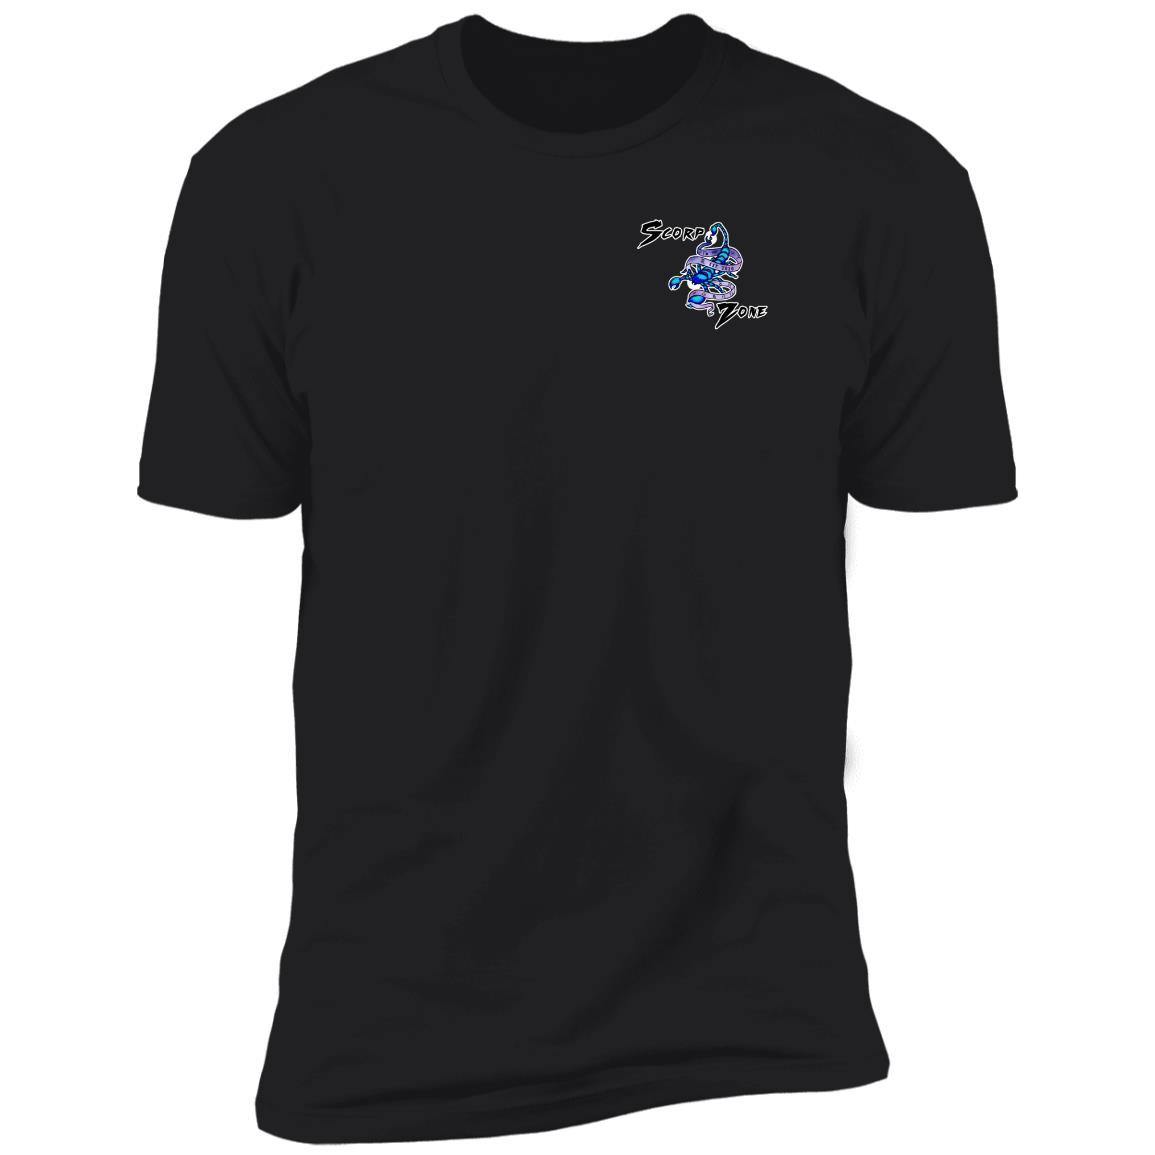 Cancer Design On Back and Small Scorp Zone Logo On Front - Premium Short Sleeve T-Shirt - ScorpZone